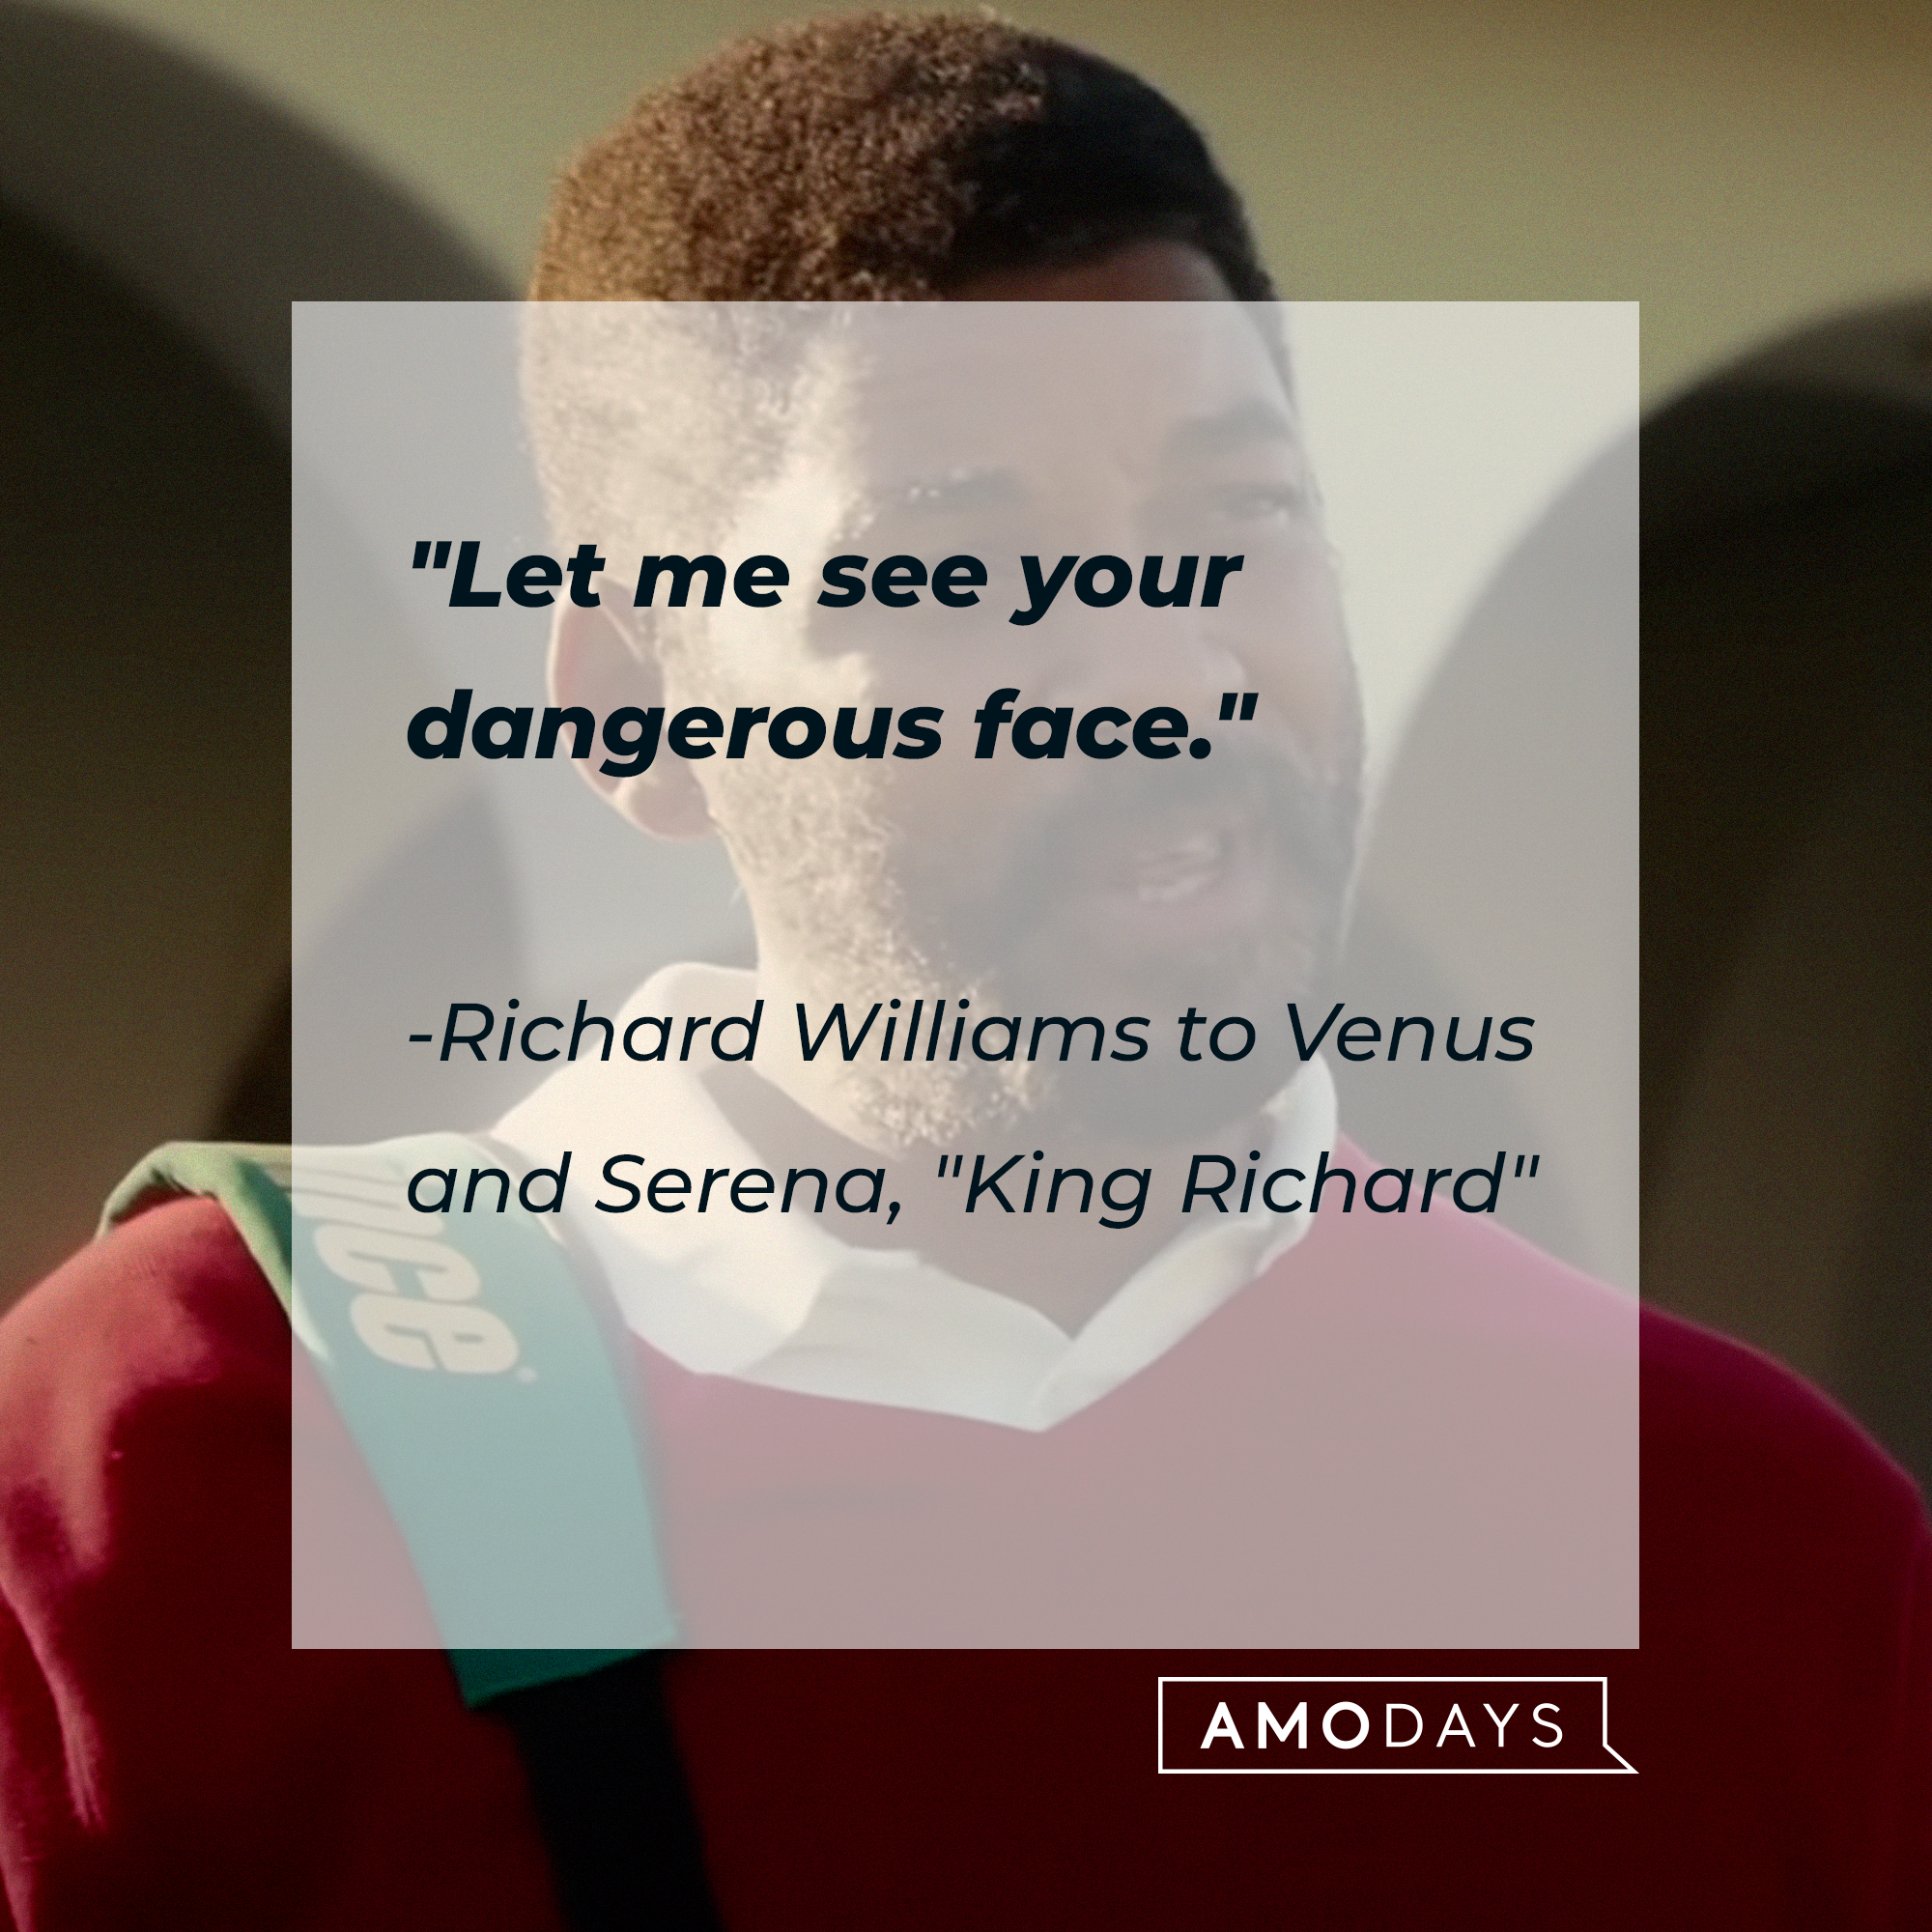 Richard Williams‘ quote: "Let me see your dangerous face." | Image: youtube.com/WarnerBrosPictures